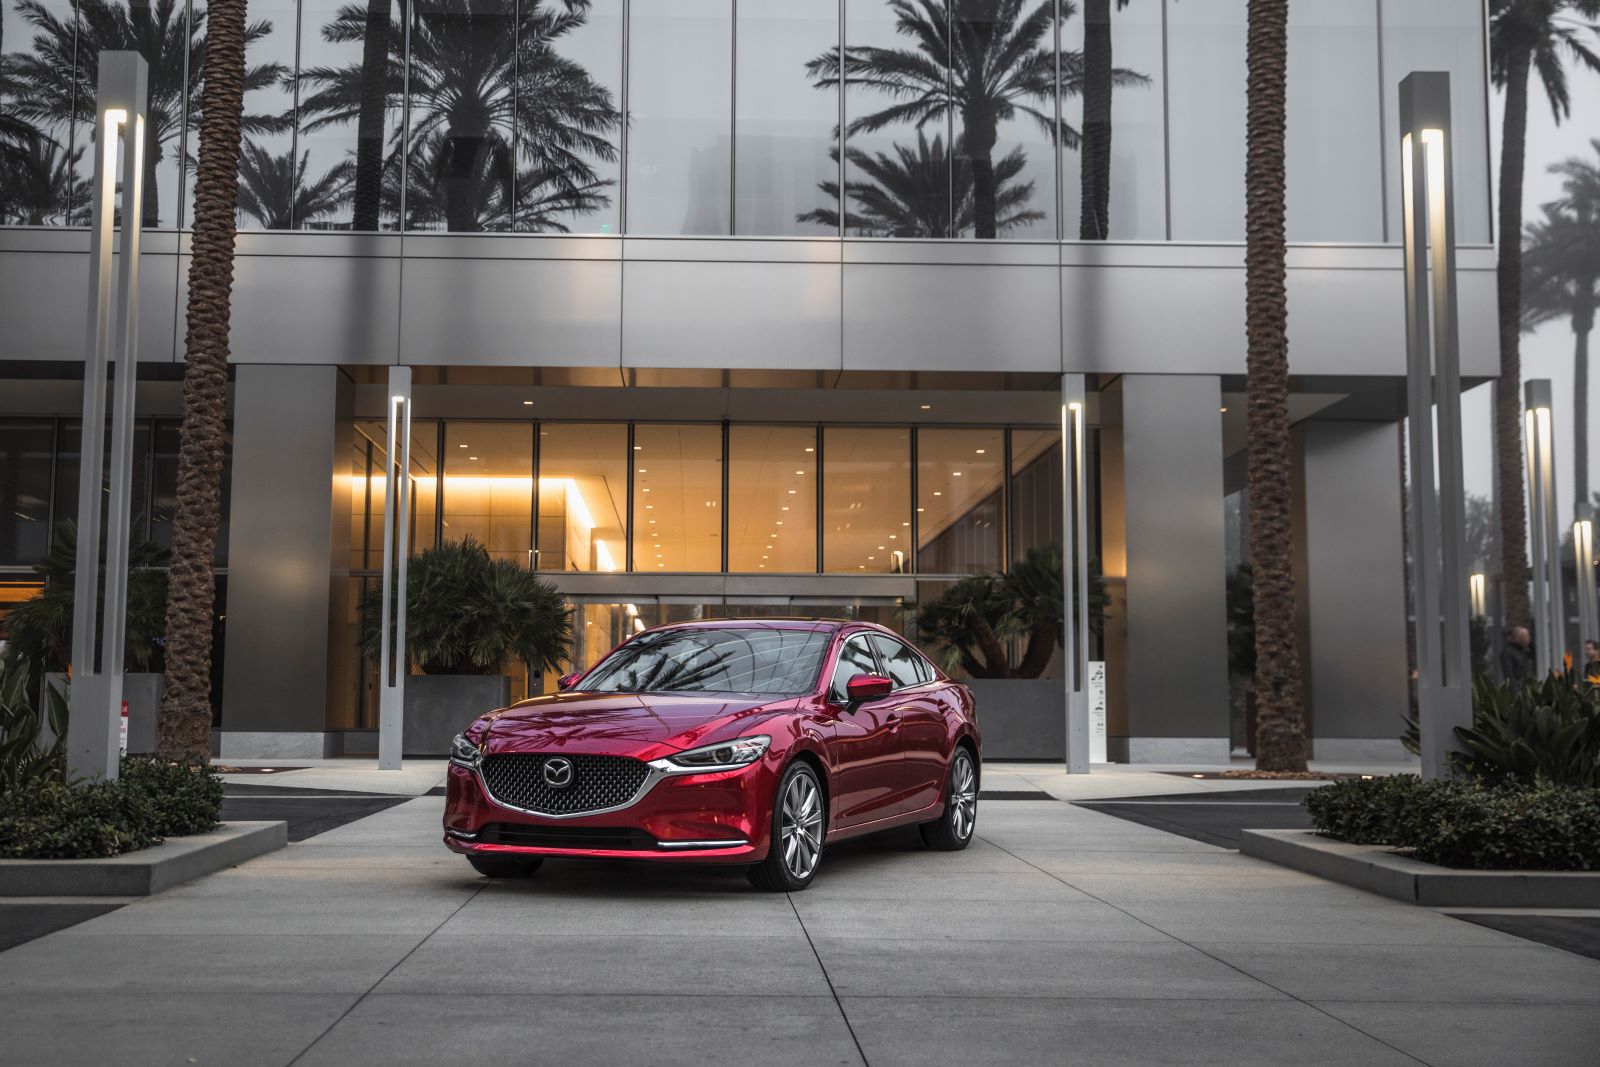 Staged shot of a 2019 Mazda6, one of the most reliable used cars, set against a backdrop of an expensive house surrounded by palm trees